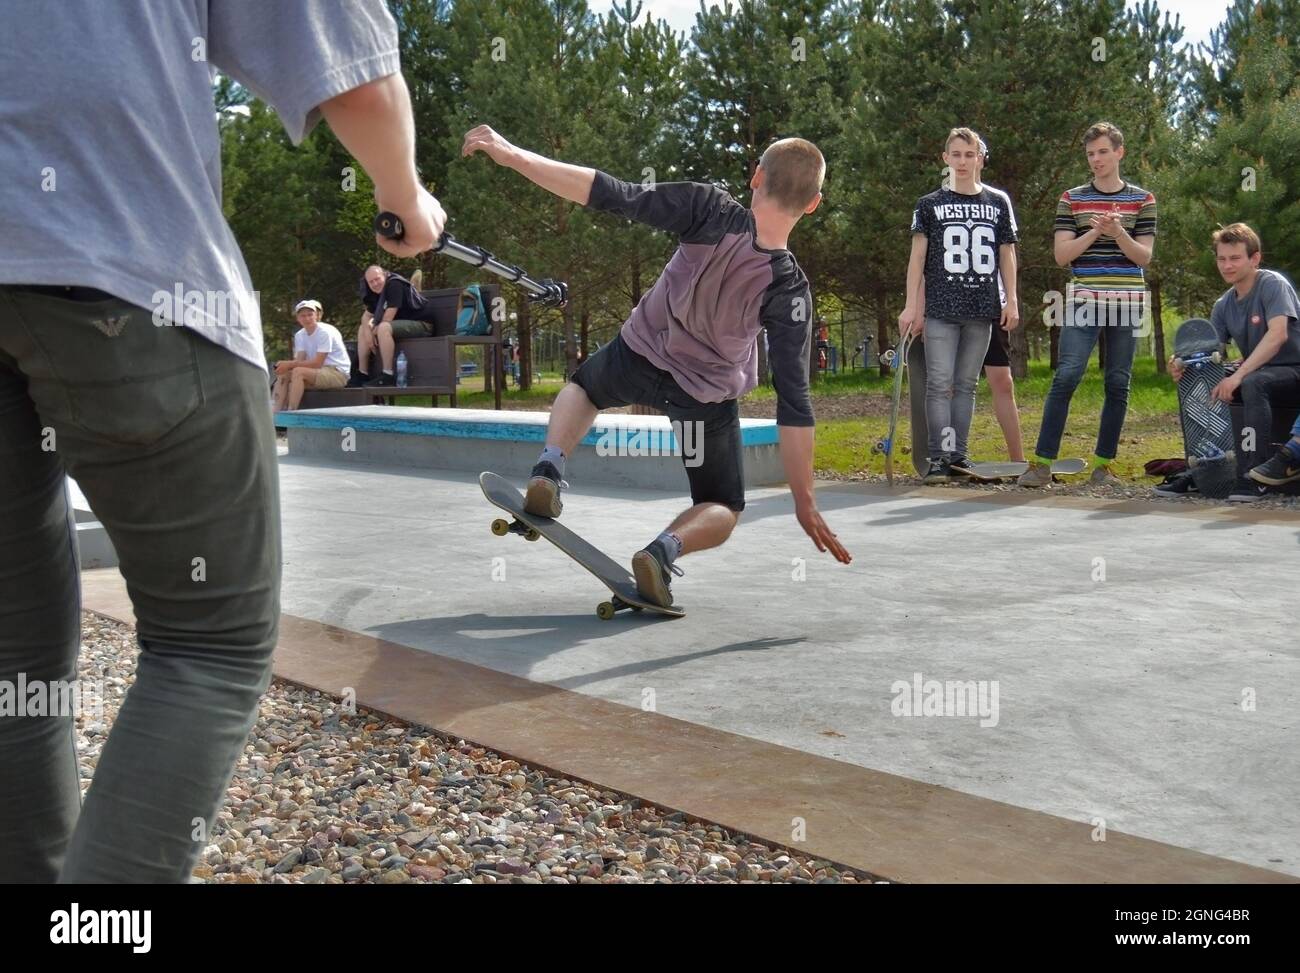 Dobrograd, Vladimir region, Russia. 20 May 2017. Competitions skateboarding and BMX dedicated to the opening of the skateboarding season. Teen on skat Stock Photo